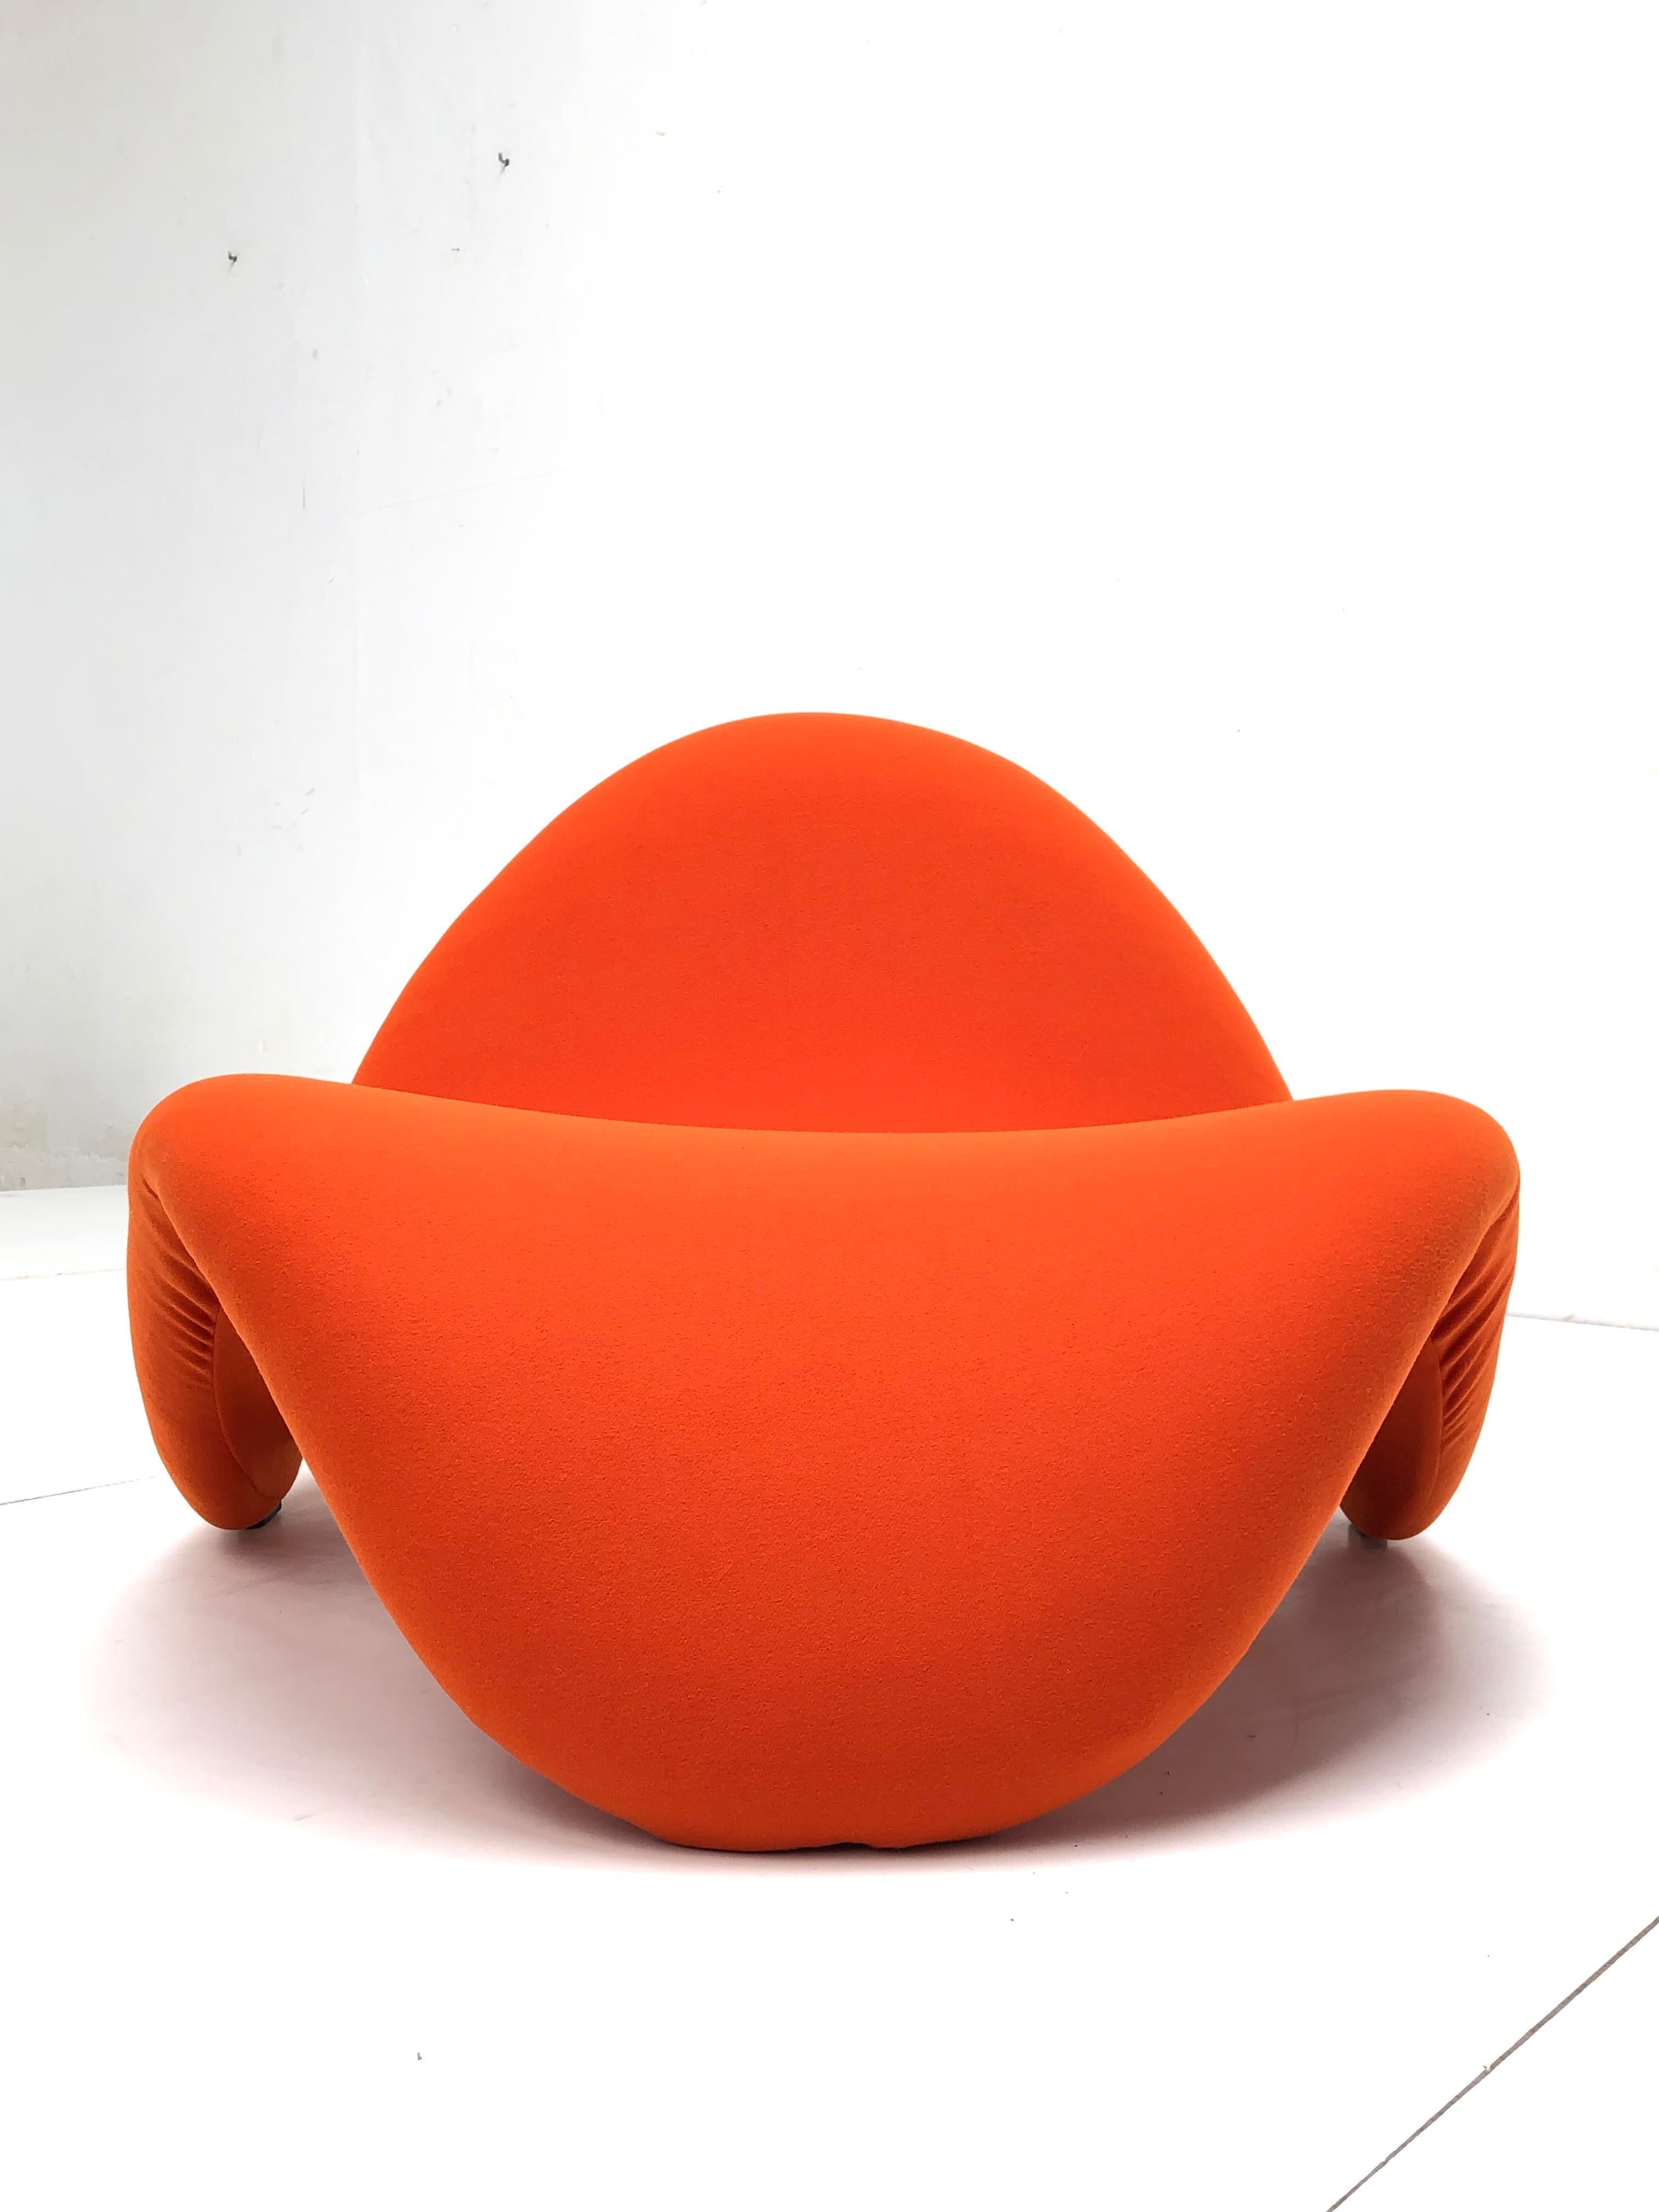 Dutch Early Edition Pair of Tongue Chairs F577 by Pierre Paulin for Artifort, 1967